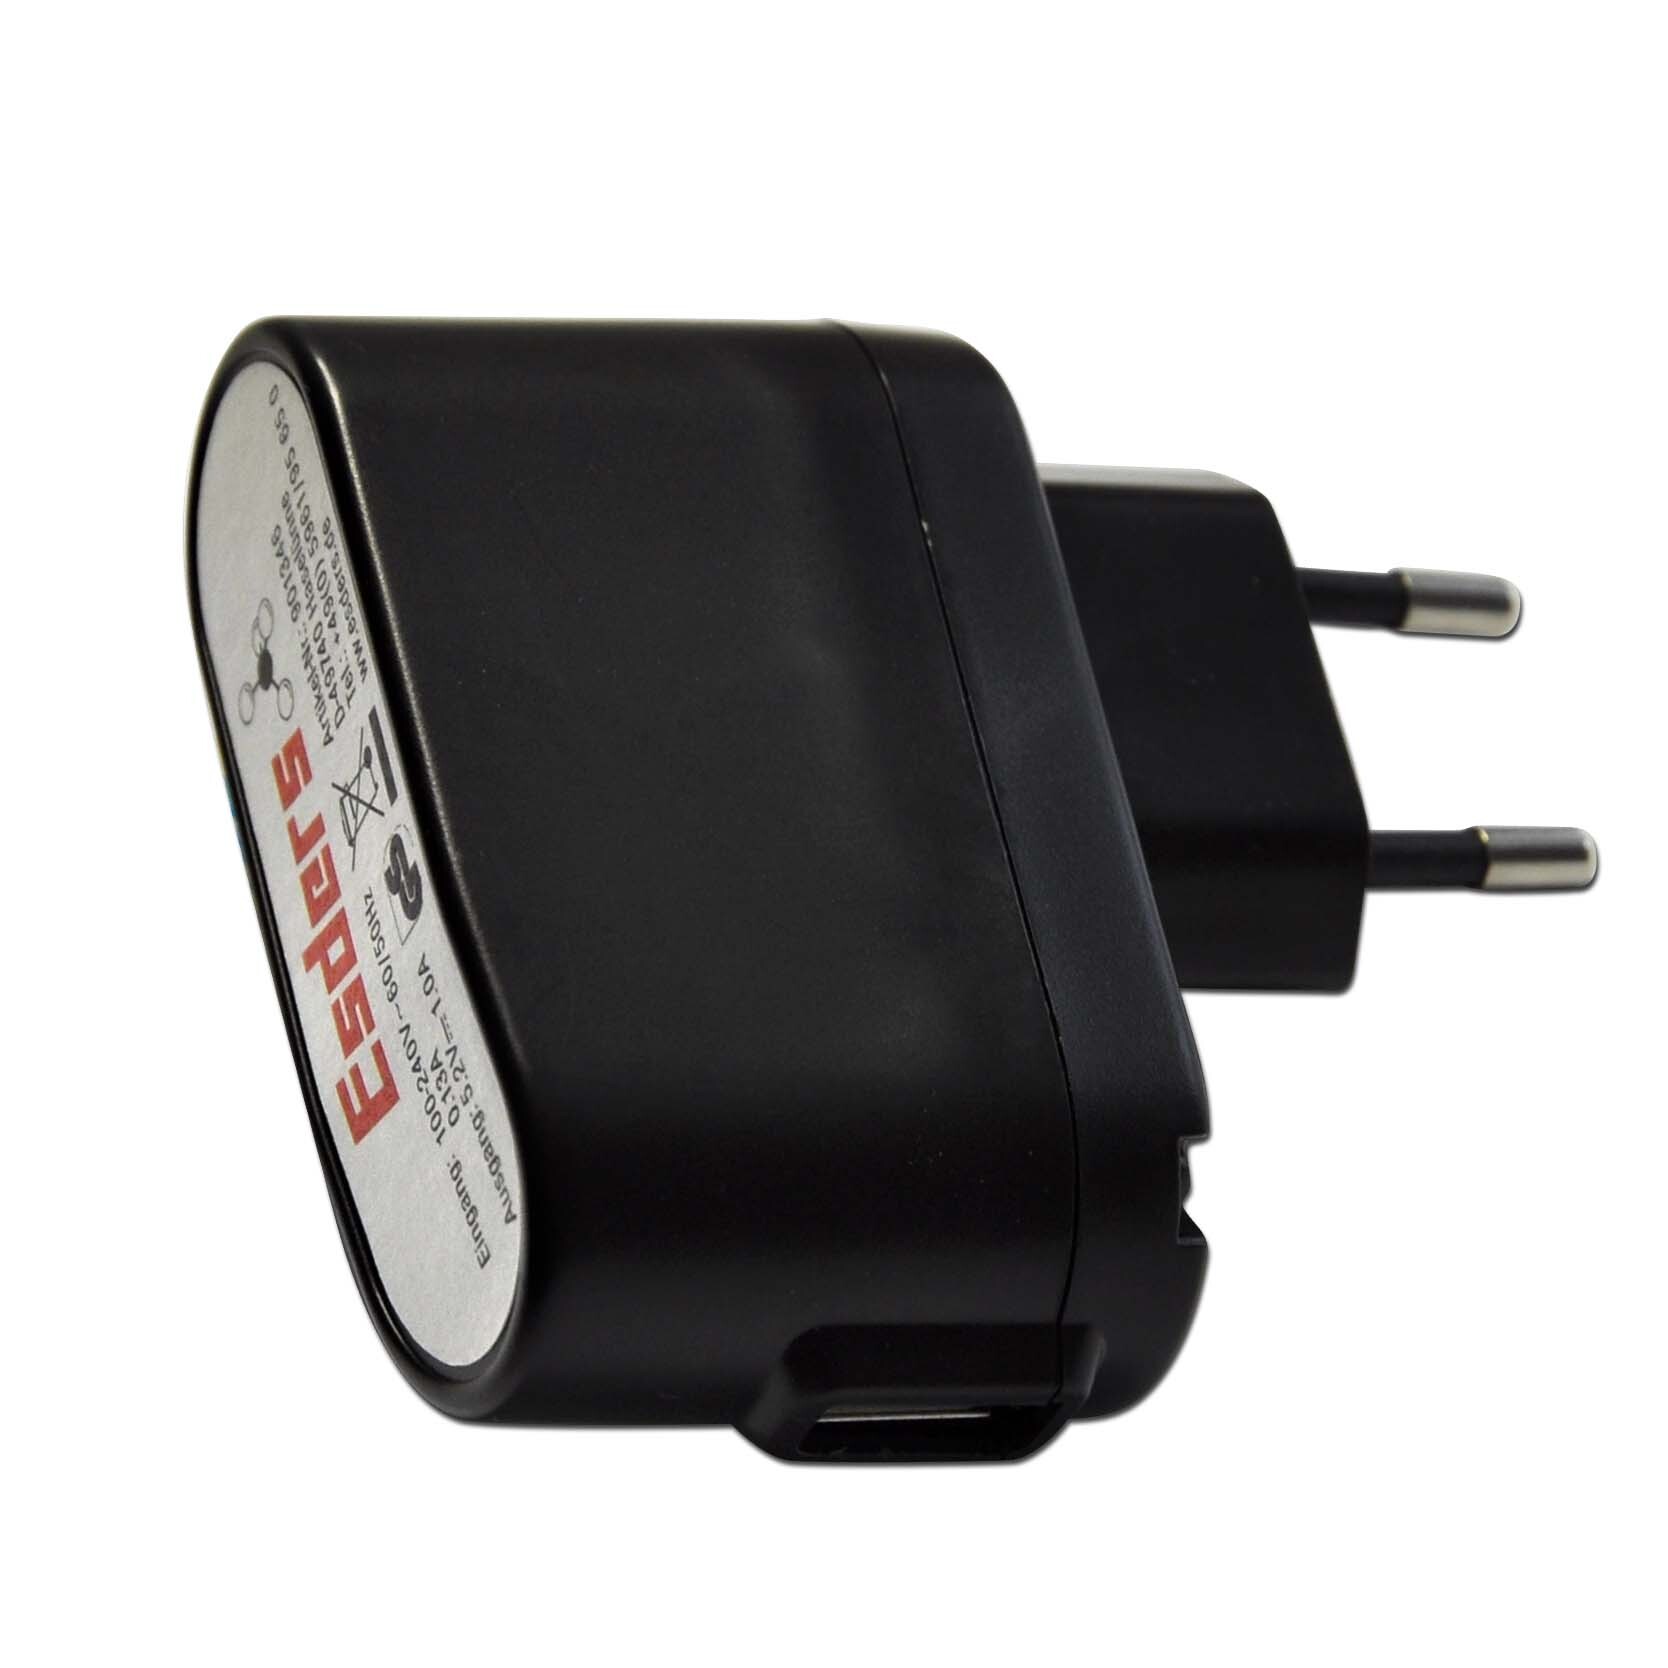 Mains adapter 230V with outlet USB